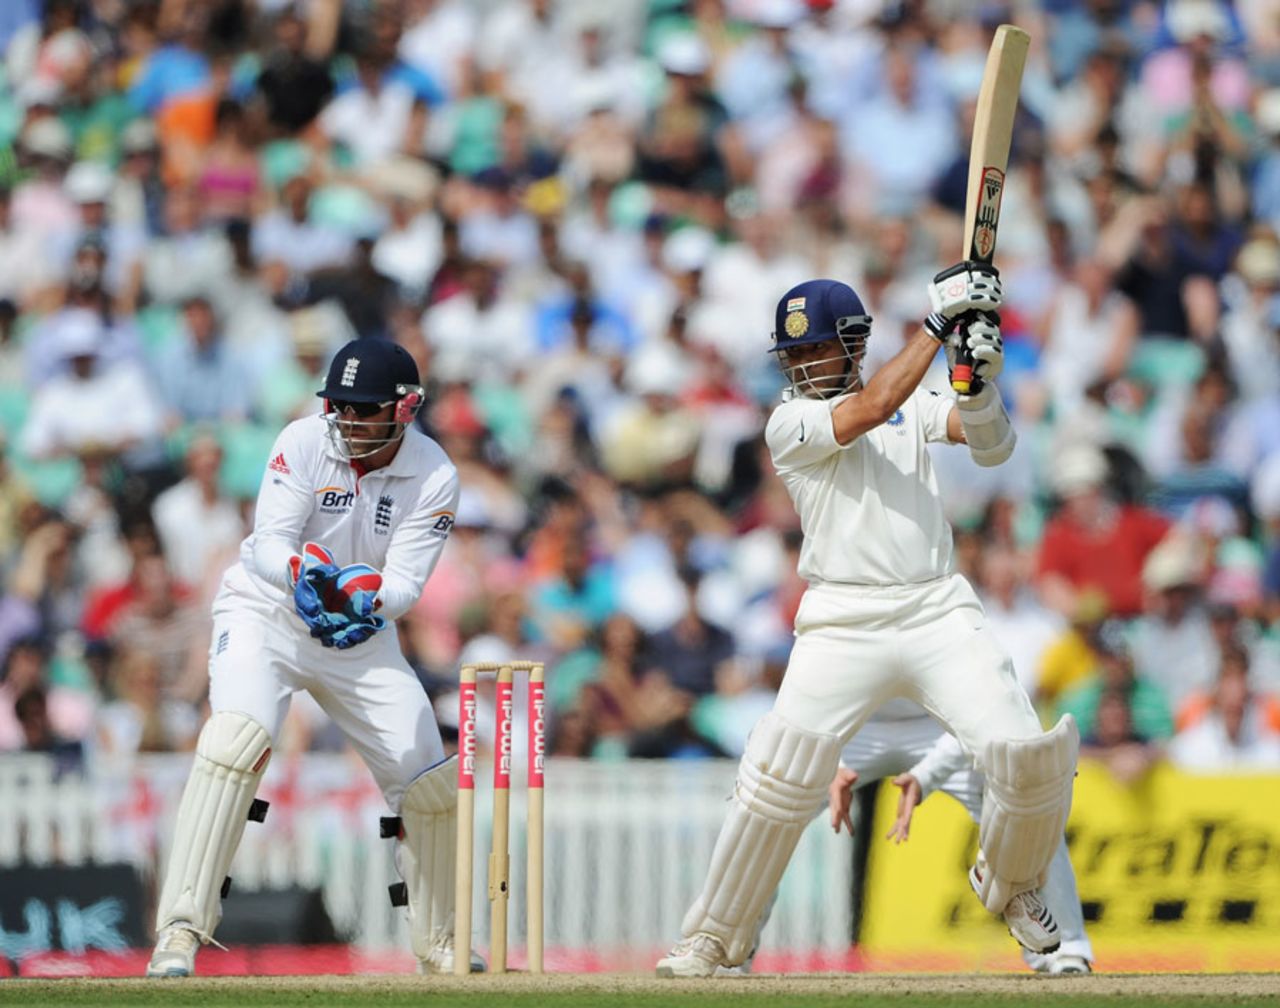 Sachin Tendulkar forces a shot through the covers, England v India, 4th Test, The Oval, 5th day, August 22, 2011